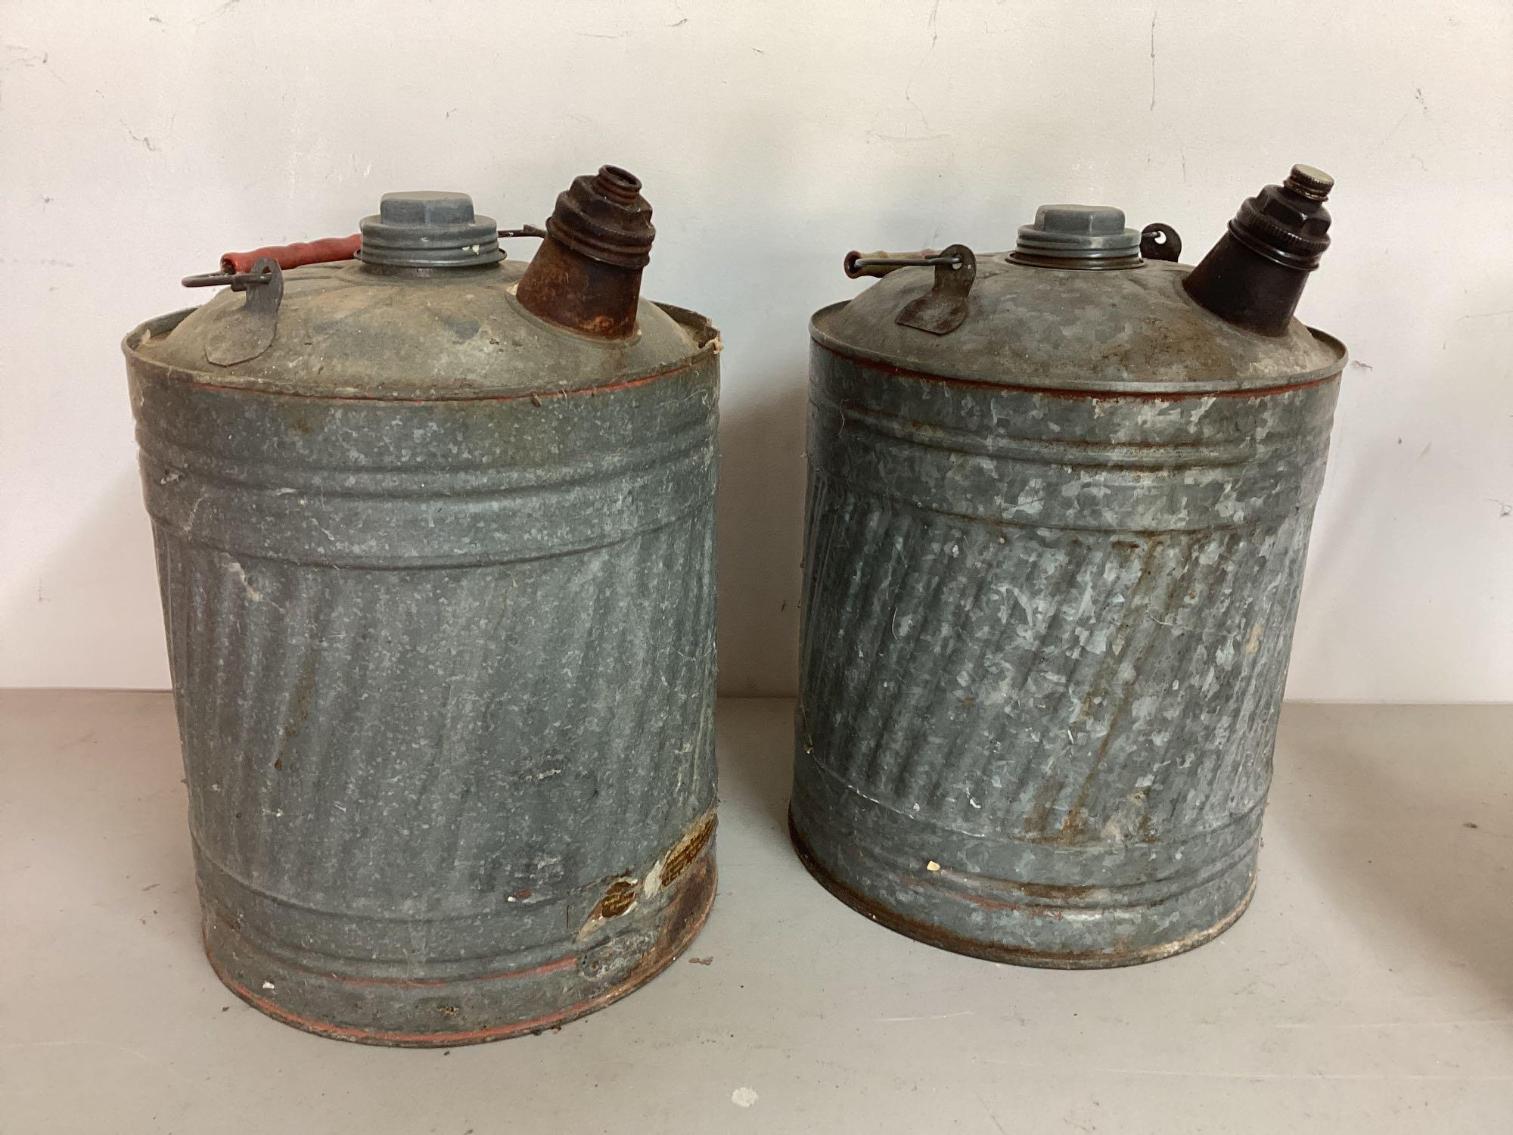 Image for Fuel Cans